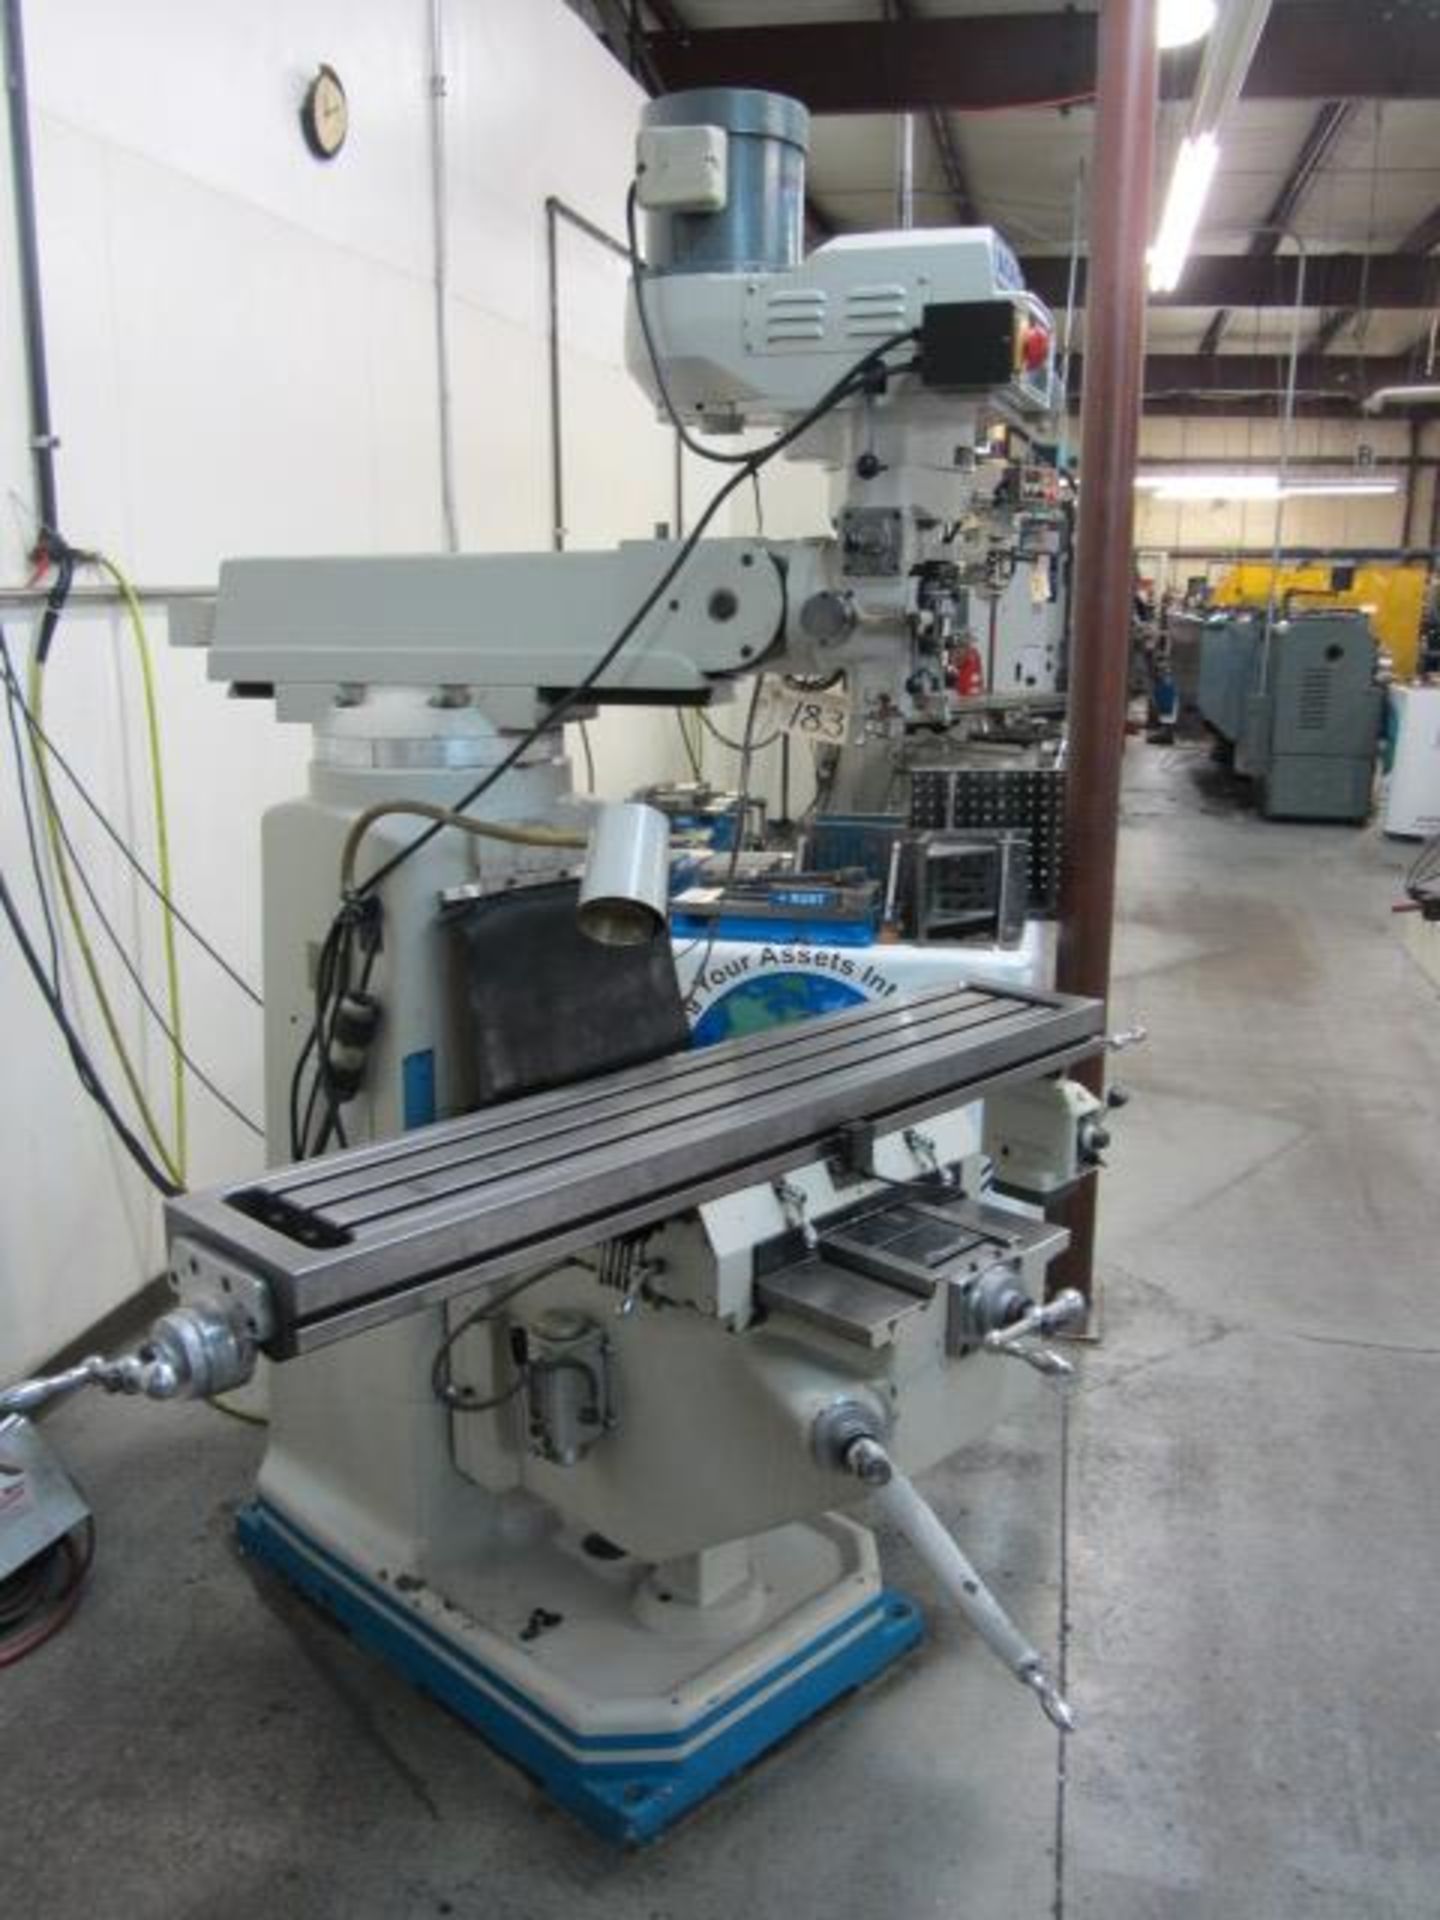 Acra Model AM-3V Variable Speed Vertical Milling Machine with 10'' x 54'' Power Feed Table, R-8 - Image 5 of 9